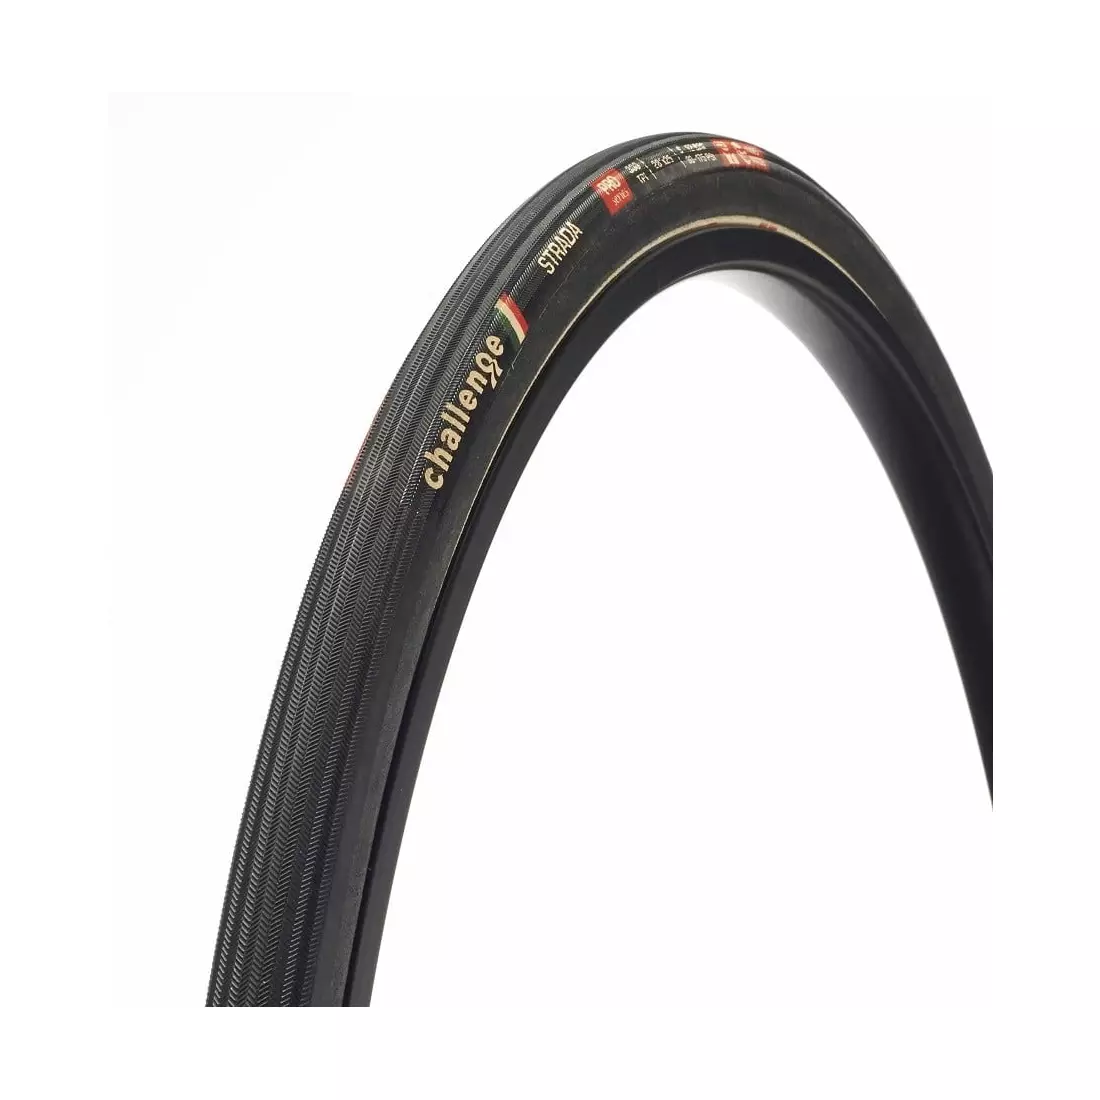 CHALLENGE STRADA OPEN TUBULARS road bicycle tire 28 &quot;(700x25mm), 300 TPI, black